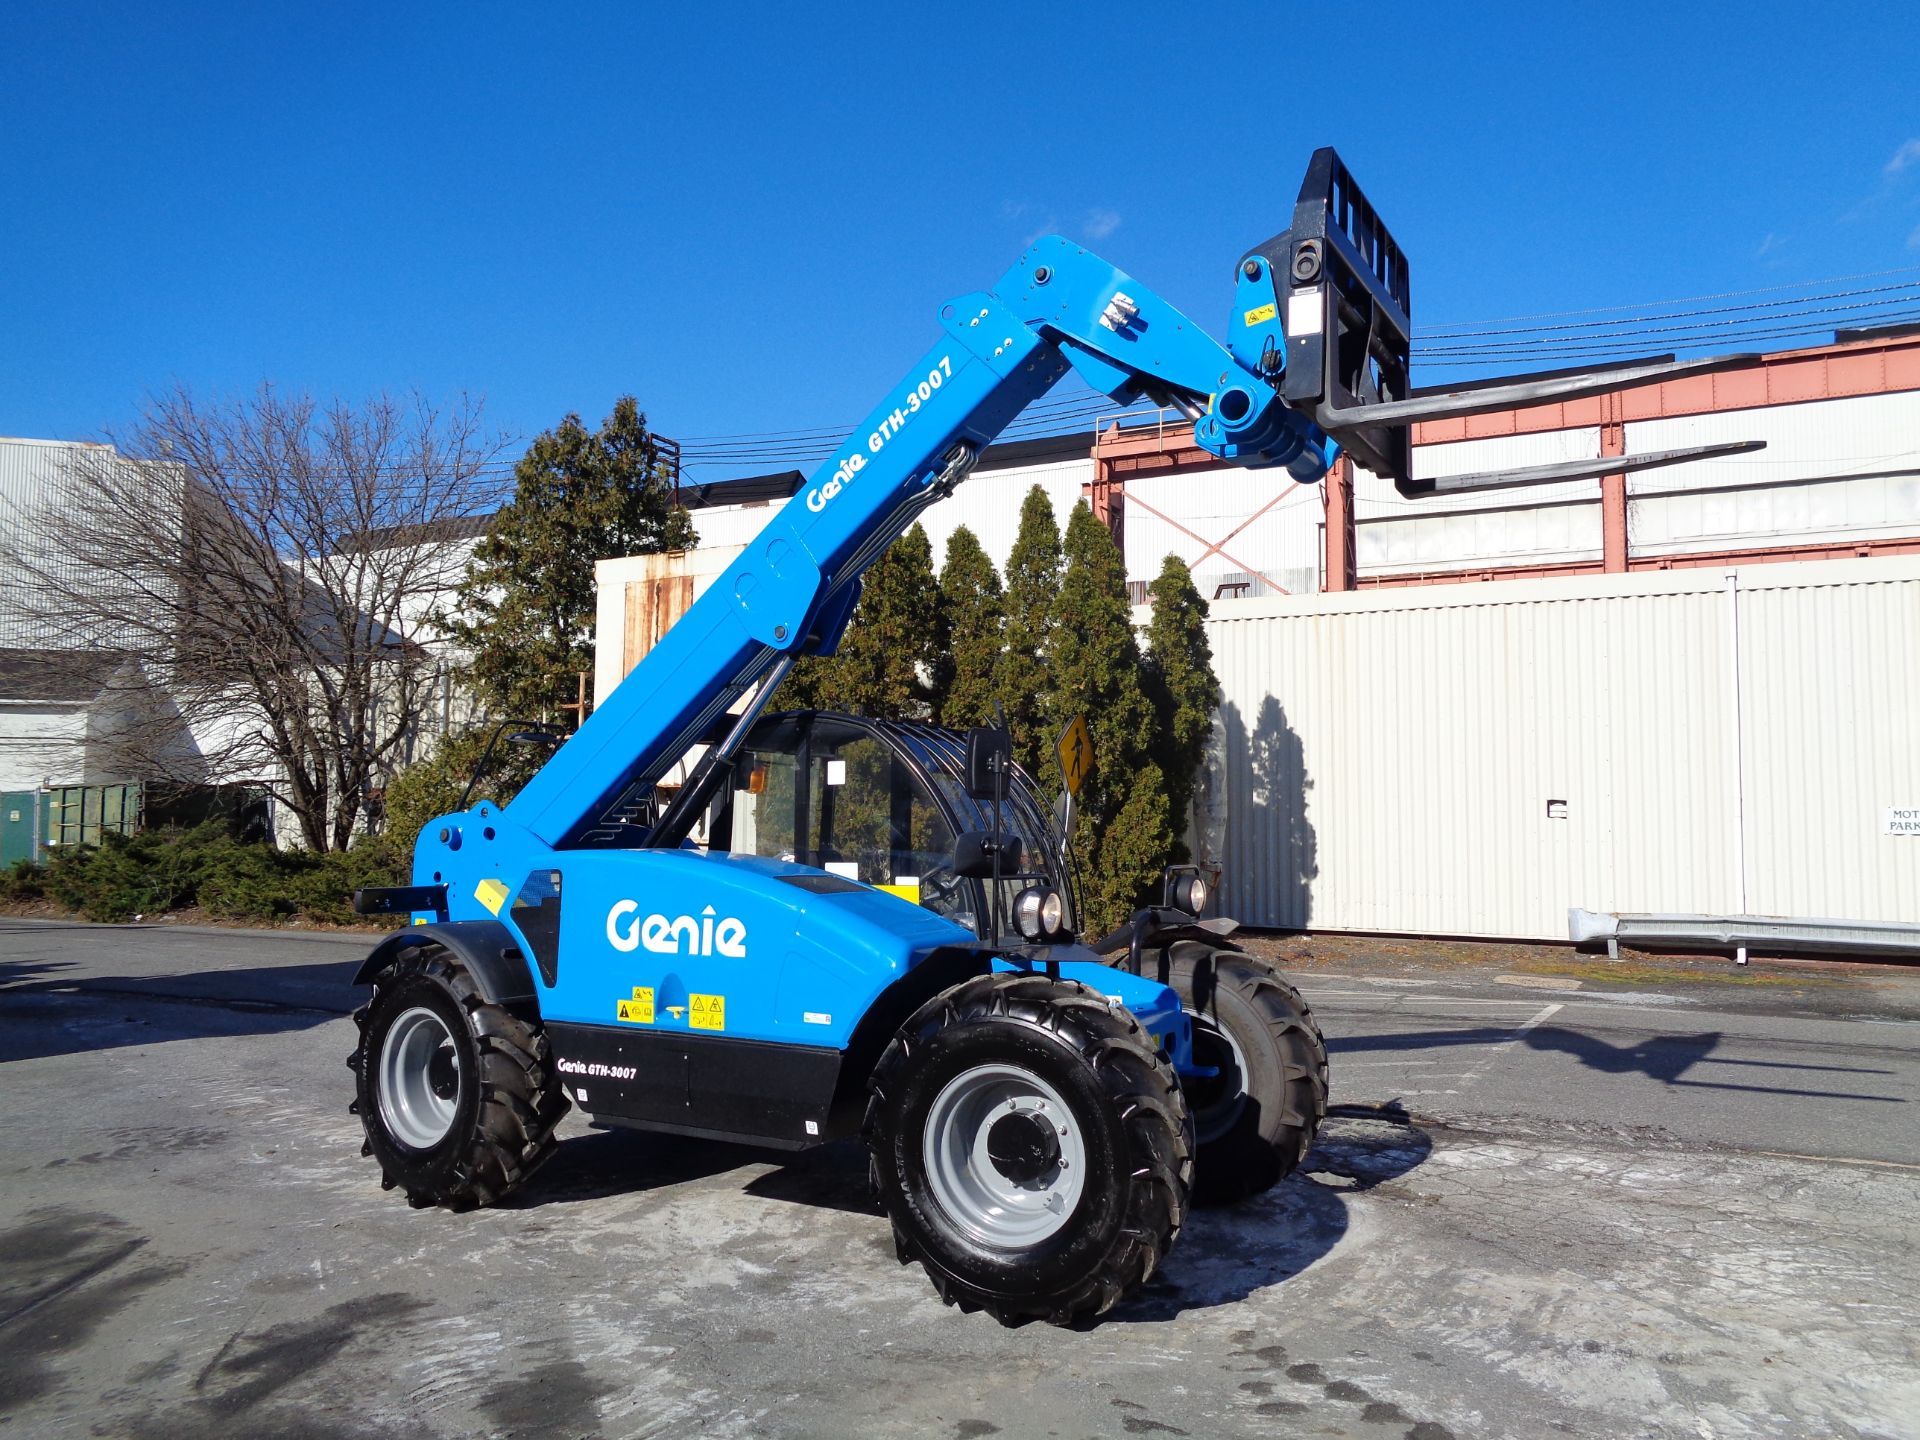 New Unused 2018 Genie GTH3007 Telescopic Forklift 6,600 lbs - Enclosed Cab - Image 5 of 23